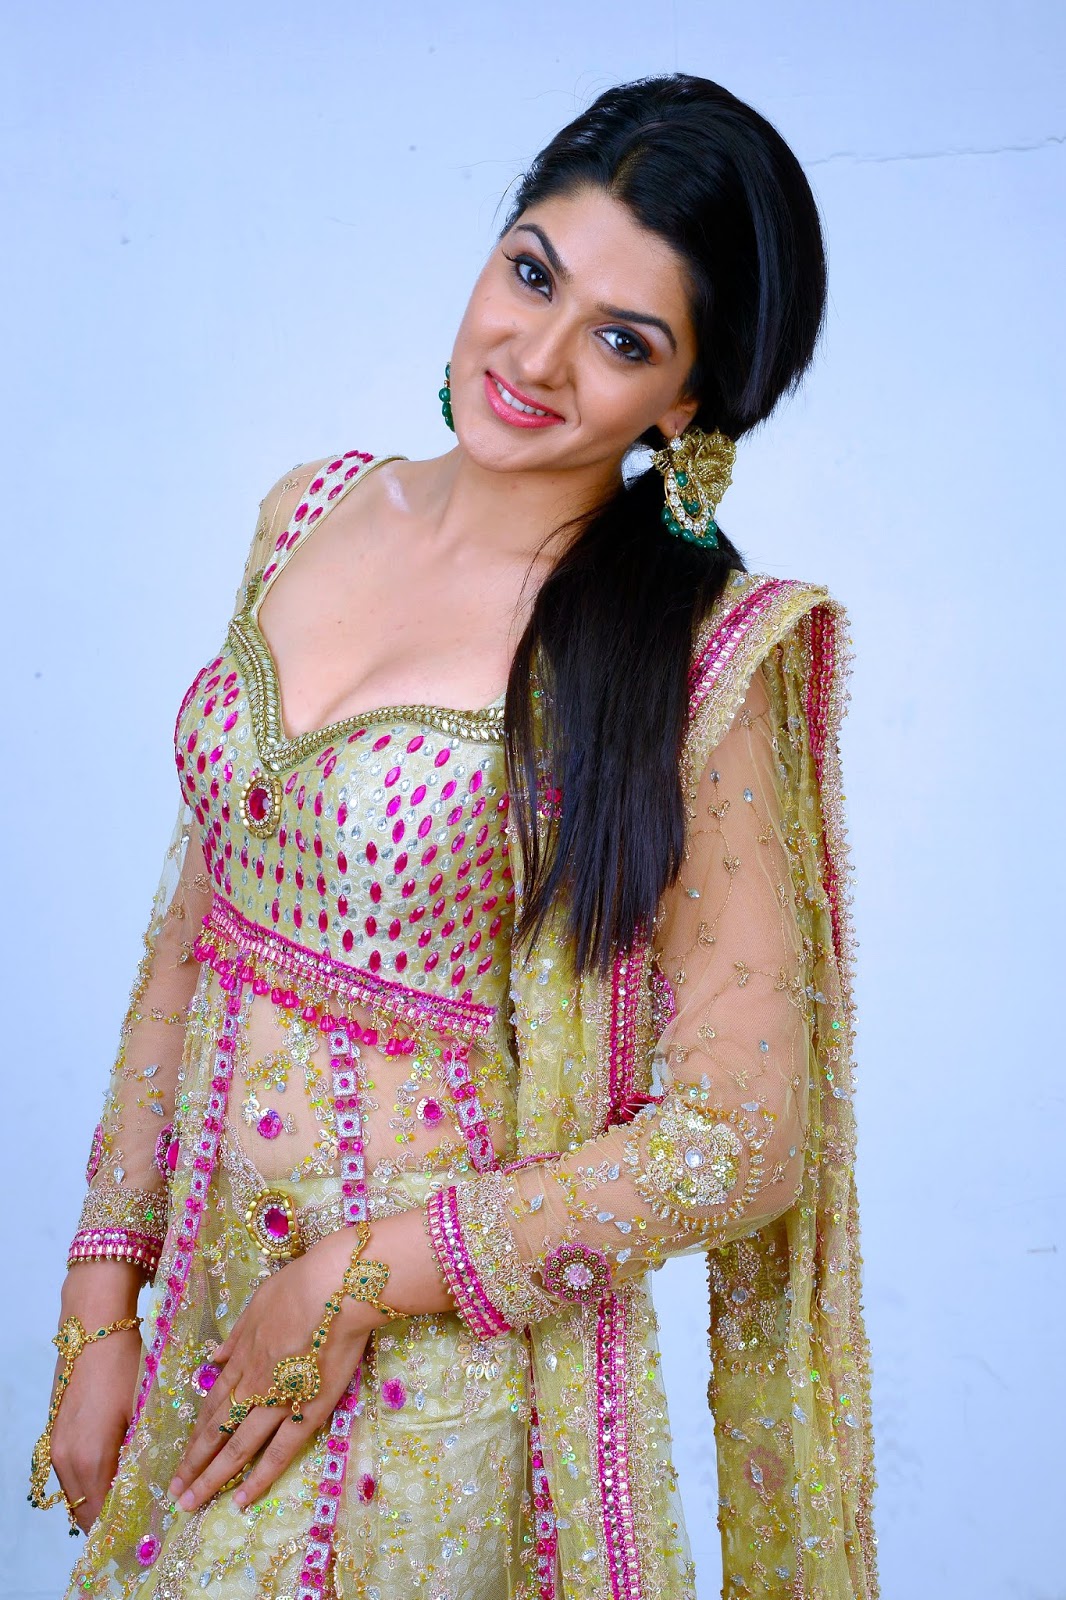 Beauty Galore HD : Sakshi Chaudhary Immensely Beautiful Photos